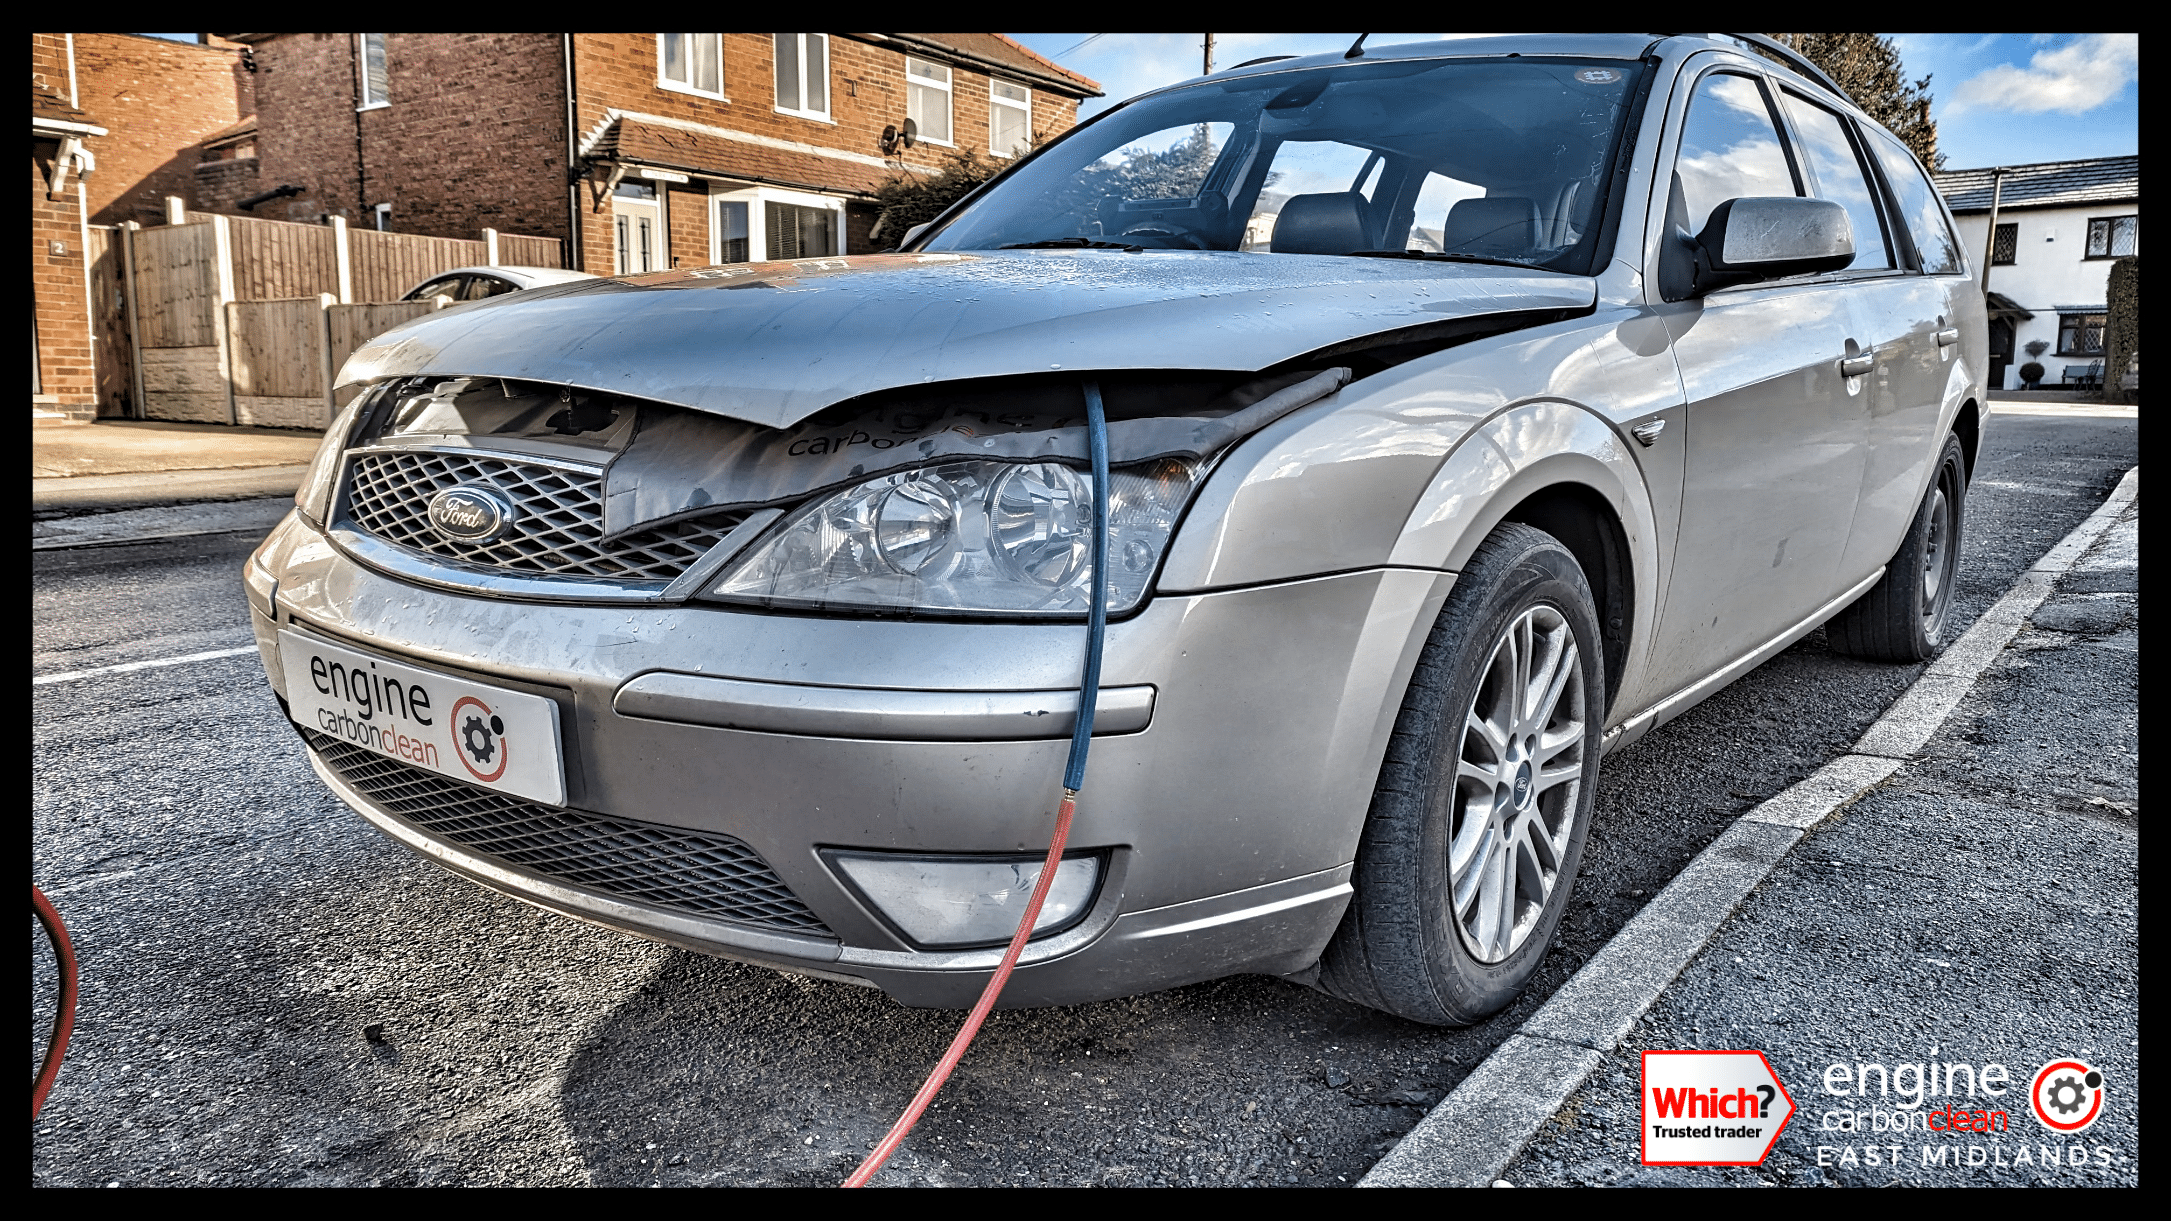 Failed MOT - Ford Mondeo 2.0 TDCi (2005 – 138,536 miles) - diagnostic and Engine Carbon Clean